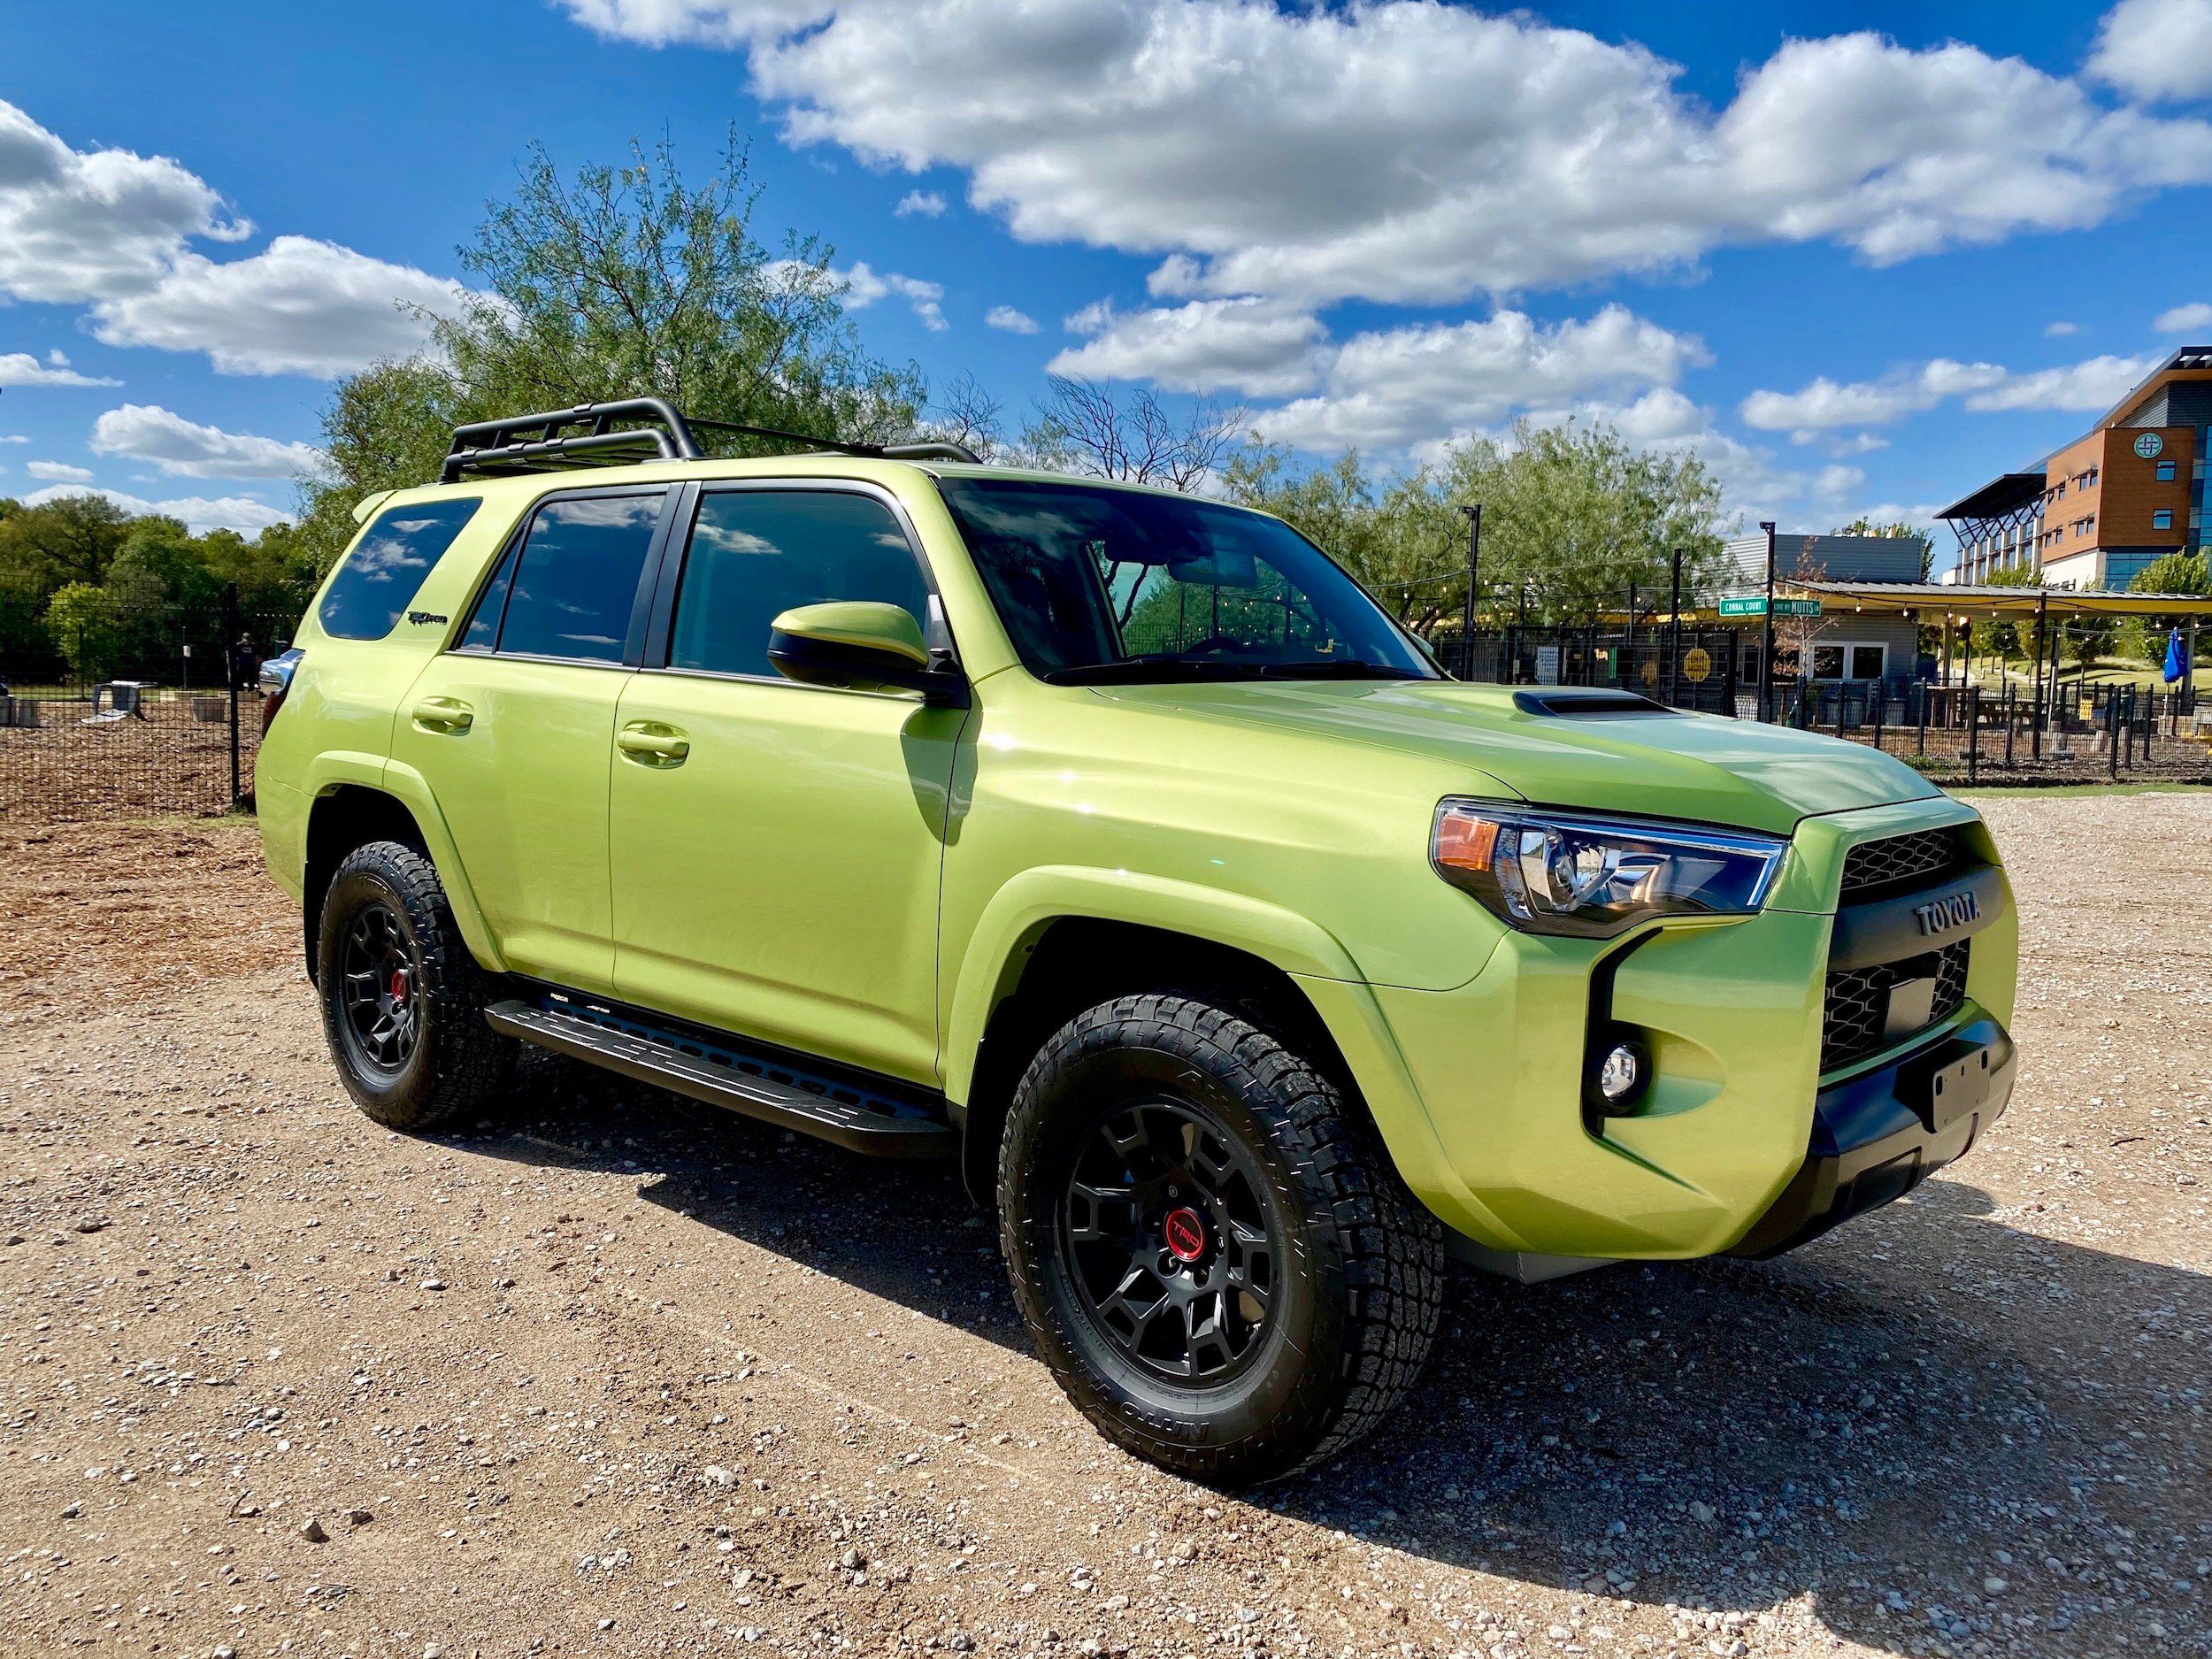 According to Toyota USA Newsroom, the 2021 Toyota 4Runner model has a new look and features a special edition, along with the release of pricing information.